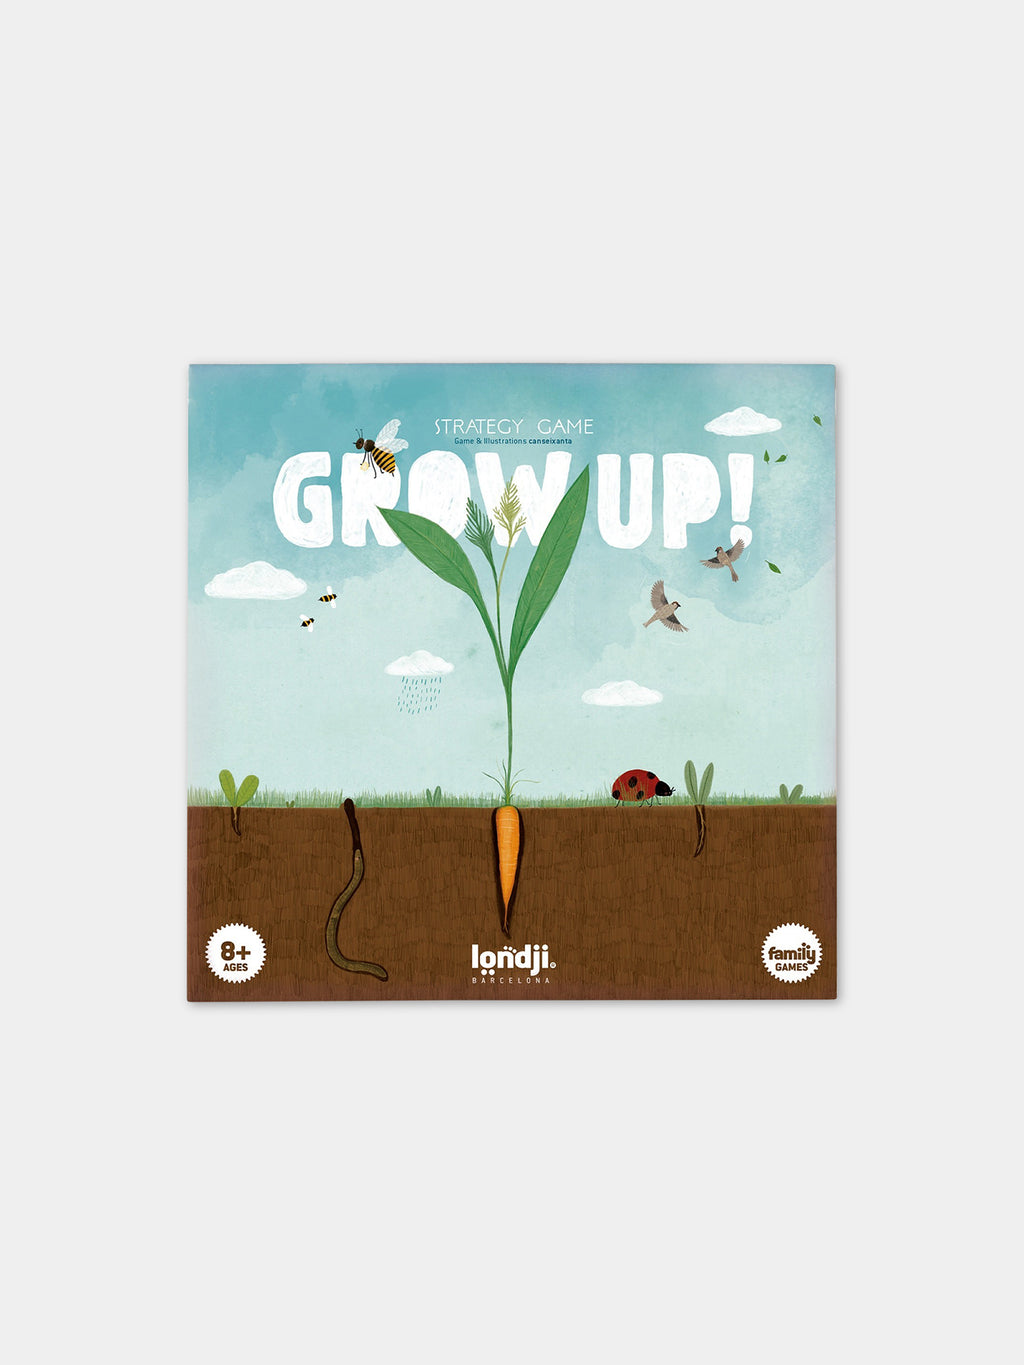 Board game for kids with garden